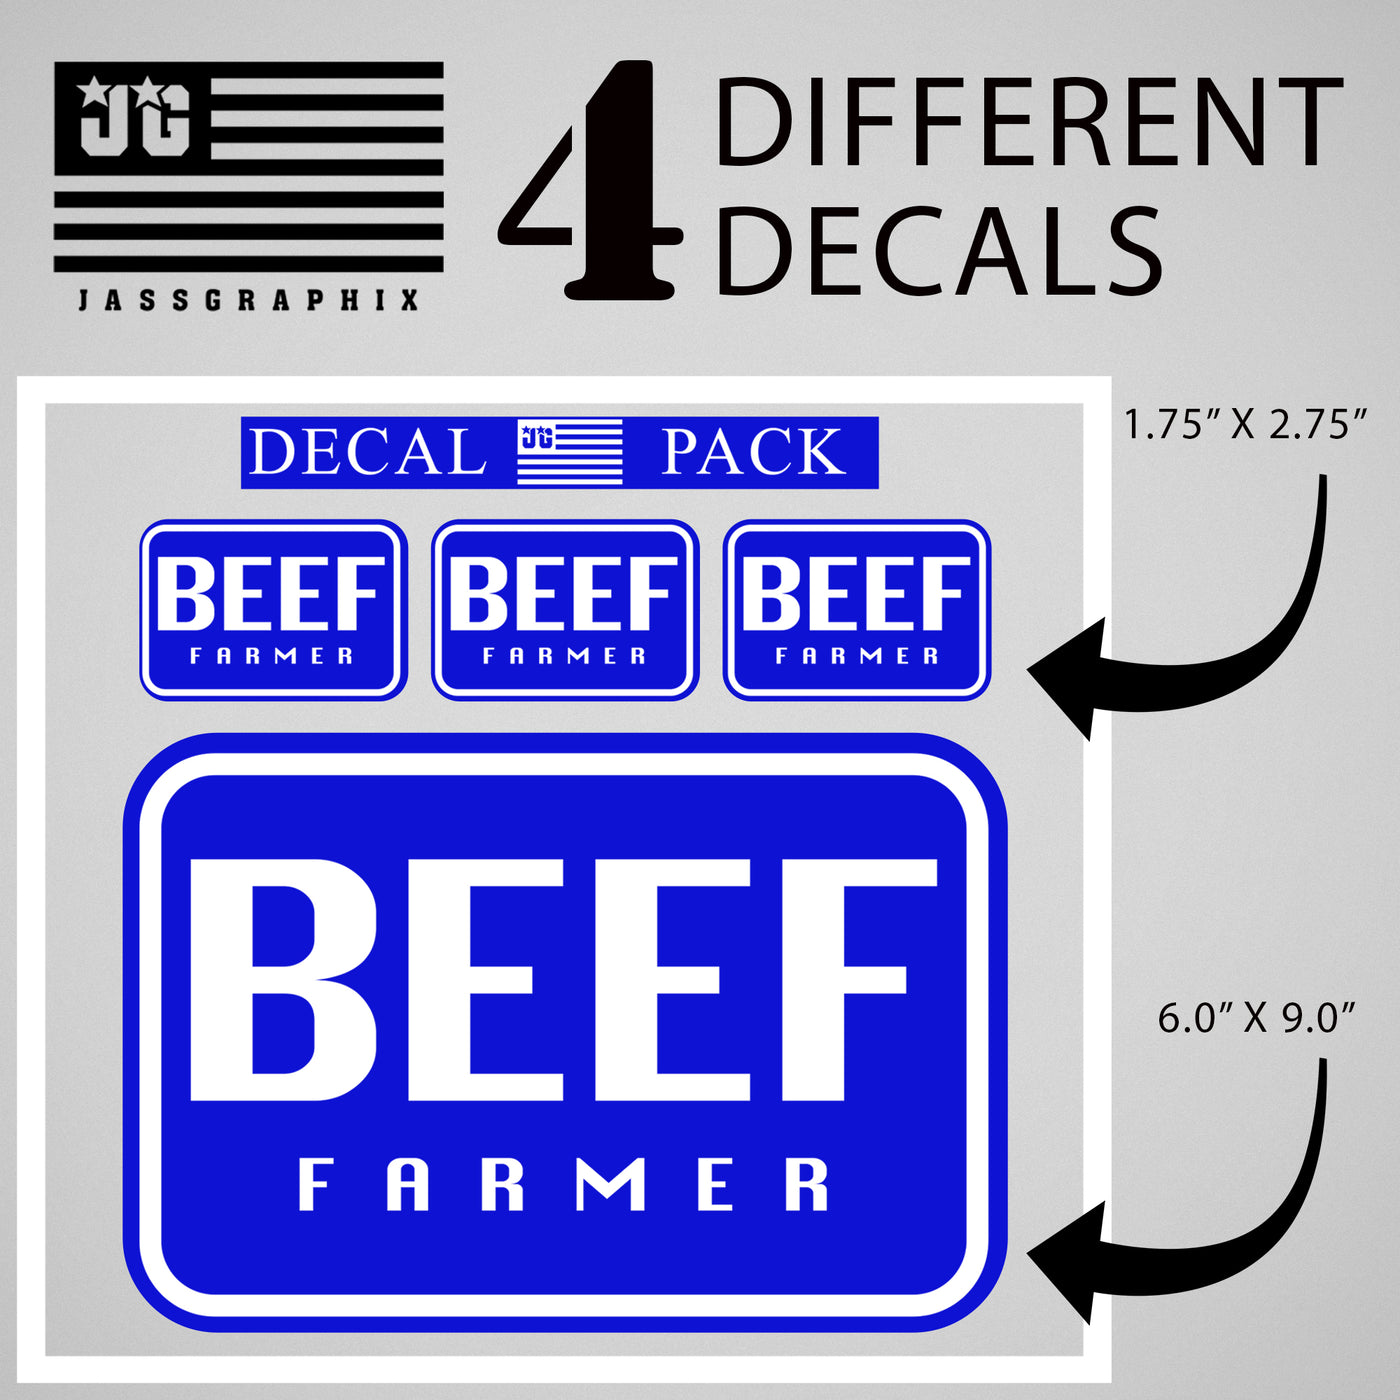 BEEF Farmer Decal Pack of 4 Stickers – Outdoor Durable – Cattle Farmer Decal